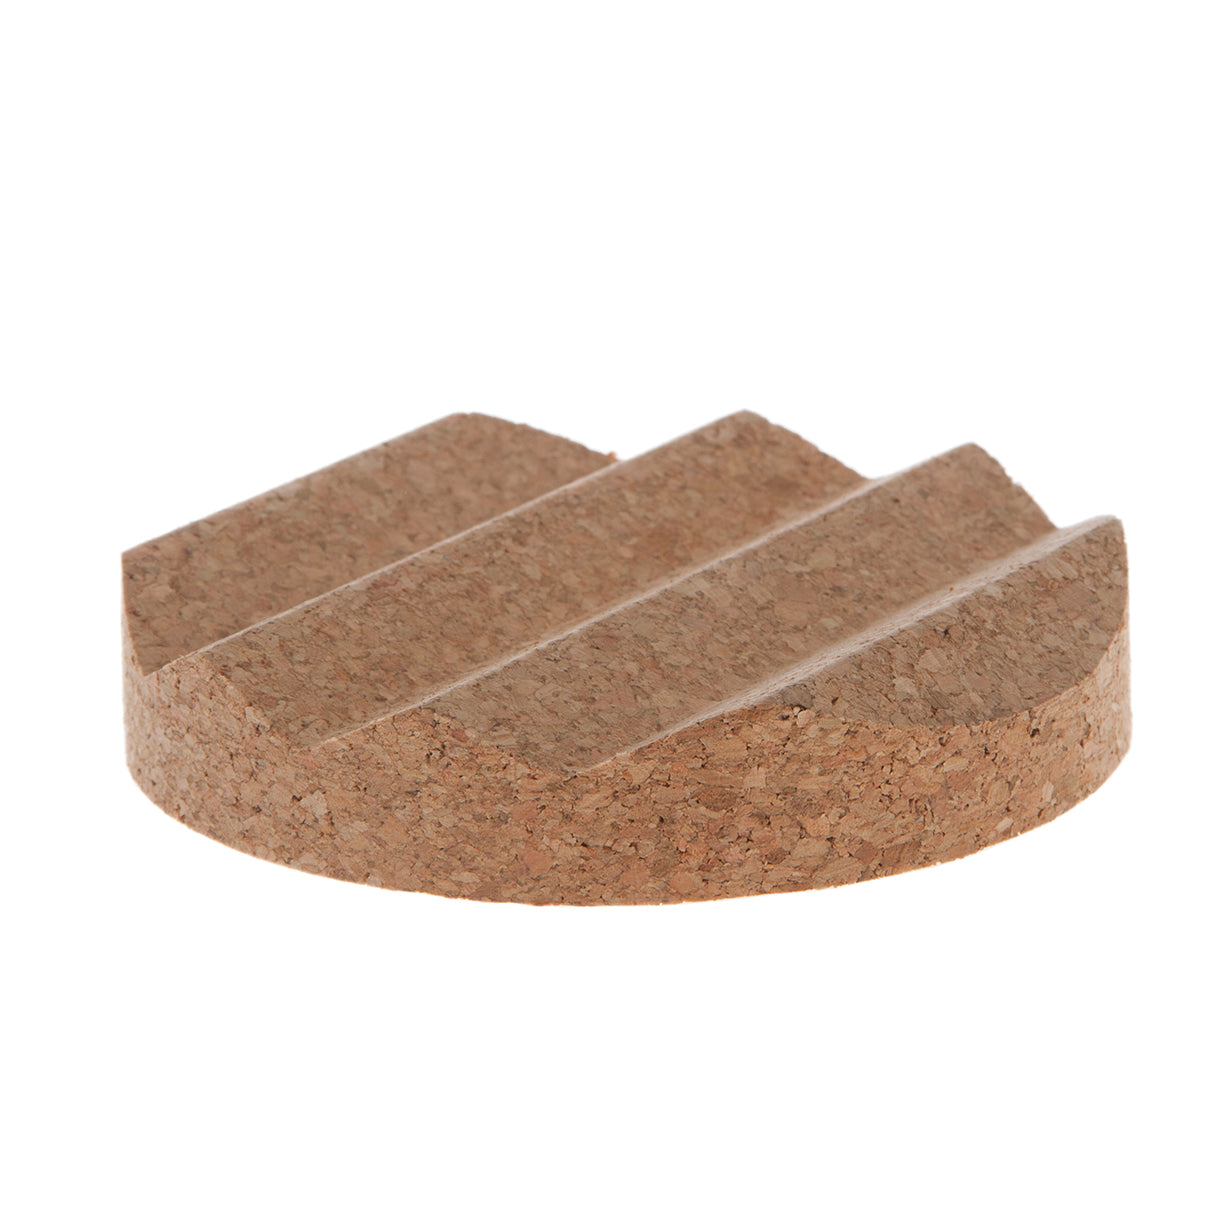 4" diameter round cork soap dish with grooves to keep the soap dry and easily drain